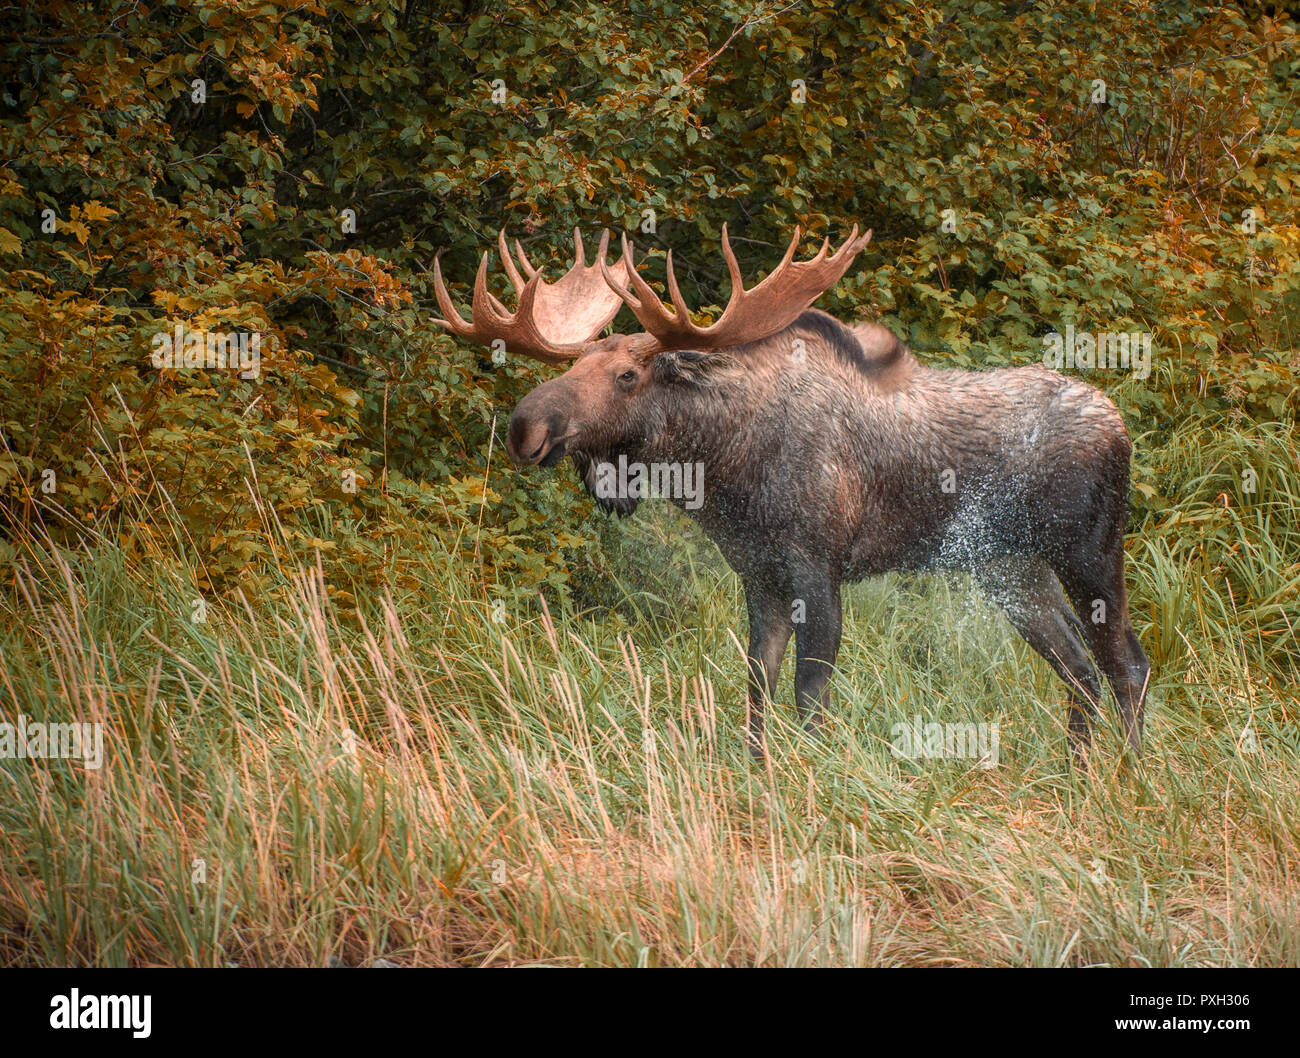 Bull Moose shaking off water after climbing out of Geographic Harbor, Katmai National Park, Alaska, USA Stock Photo